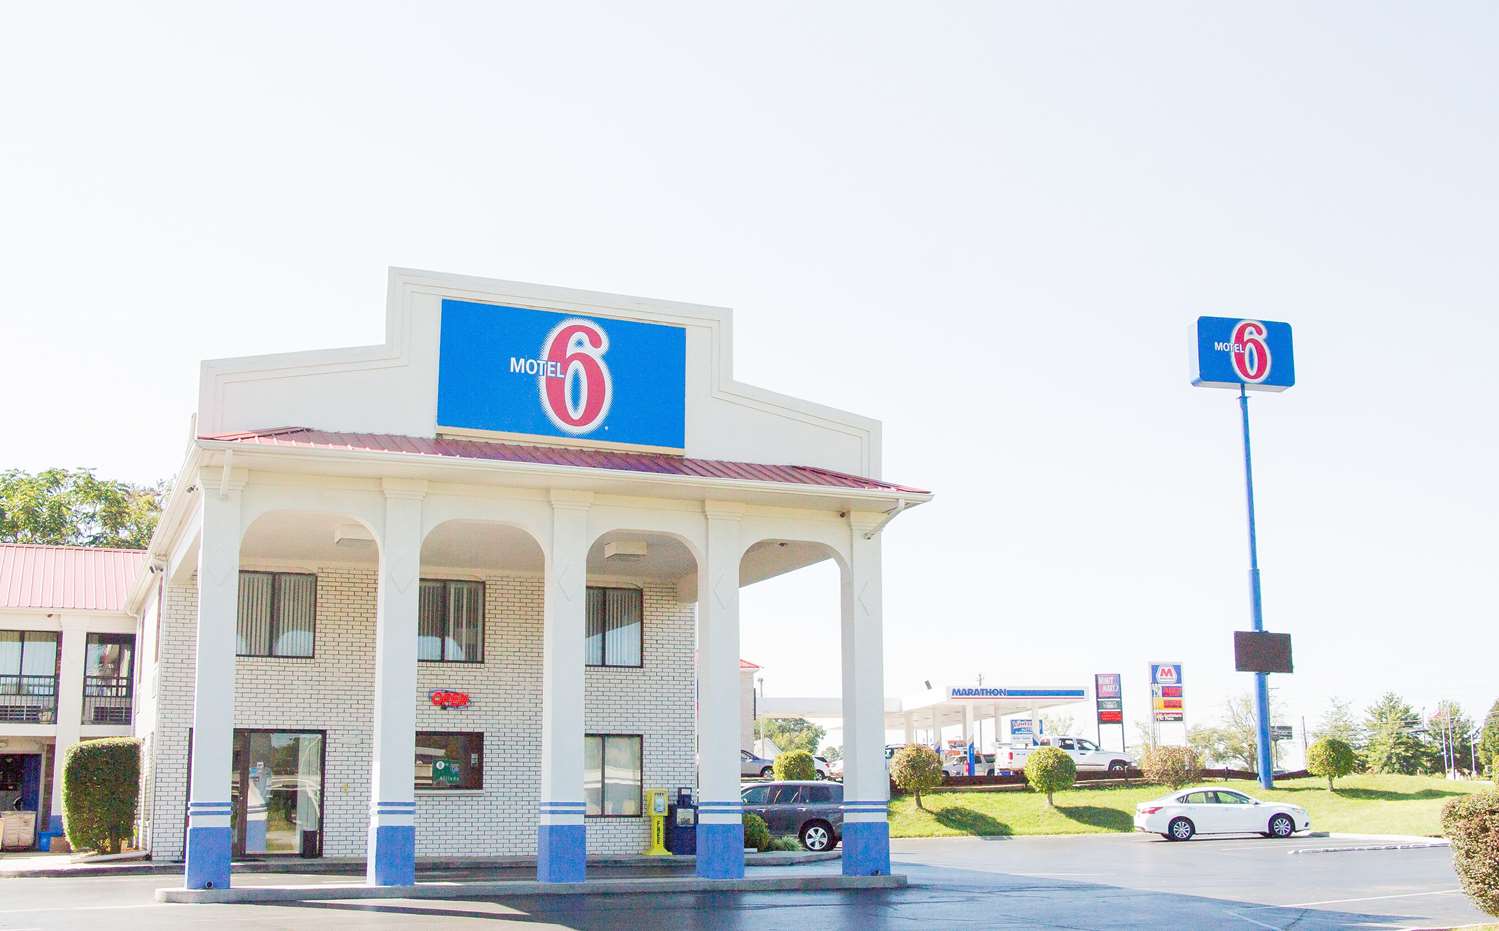 Pet Friendly Motel 6 Cookeville Tn in Cookeville, Tennessee